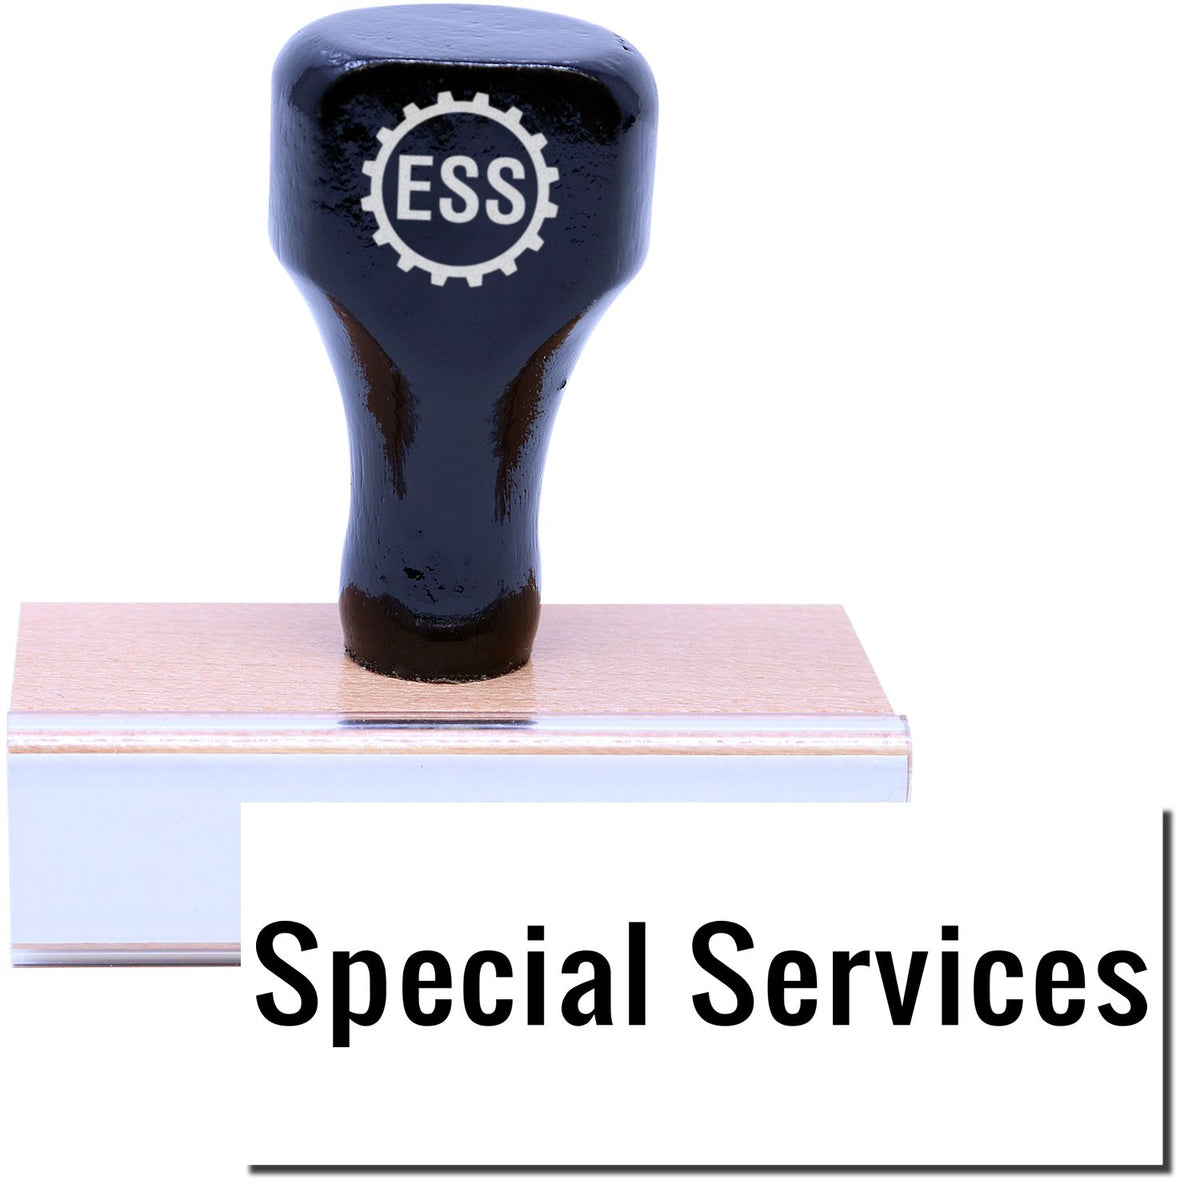 Special Services Rubber Stamp